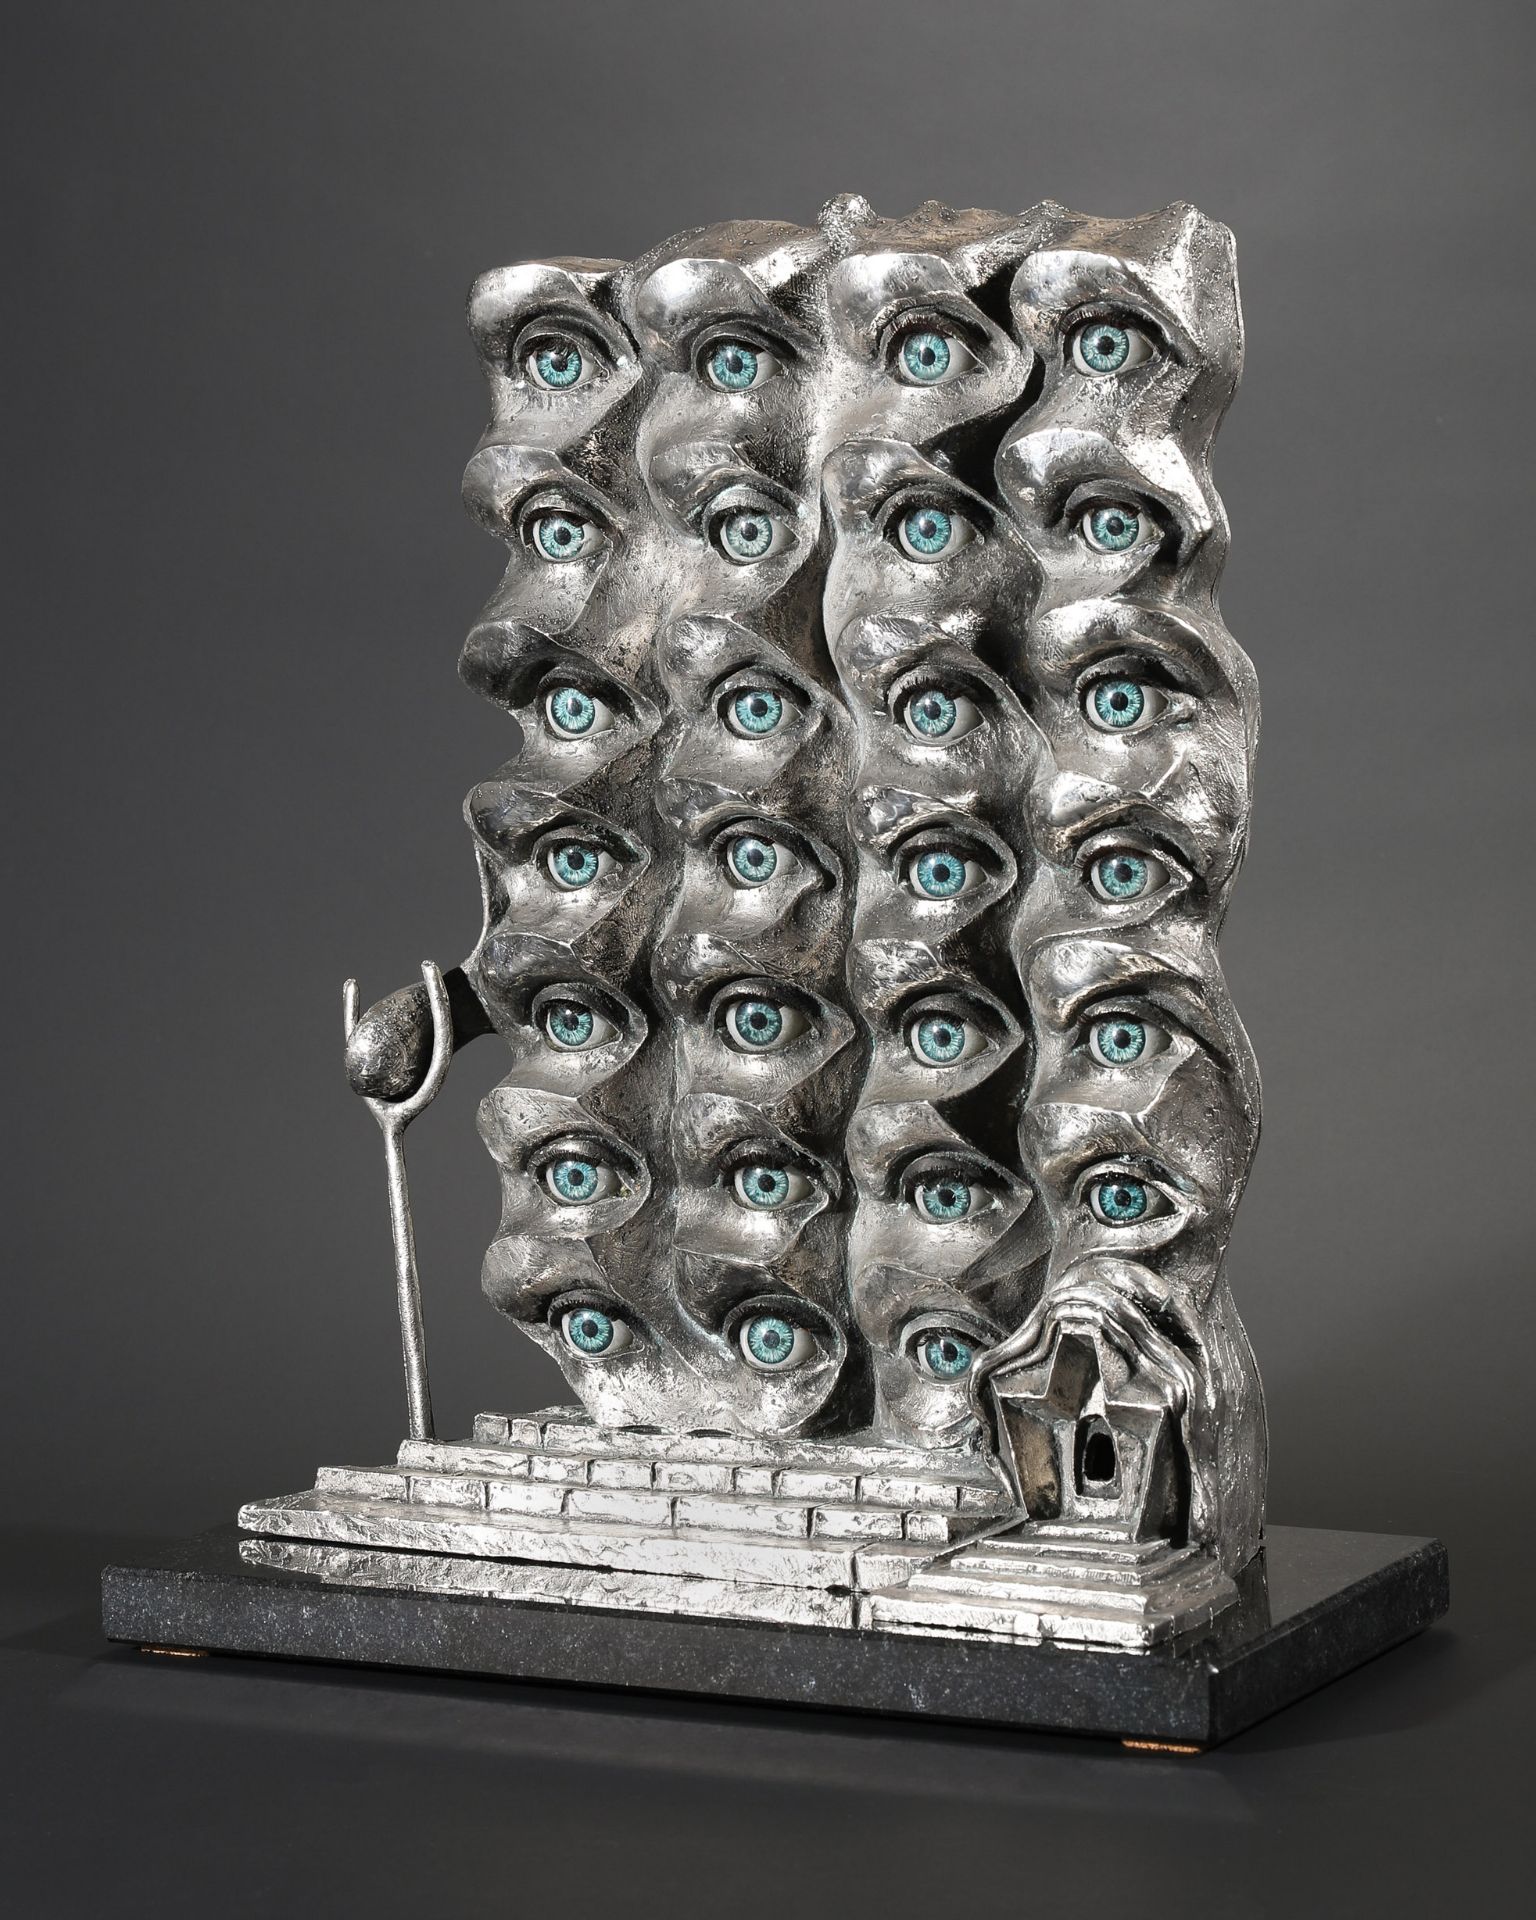 Salvador Dalí*, The Surrealist Eyes, 1980, 999 edition - Image 2 of 9